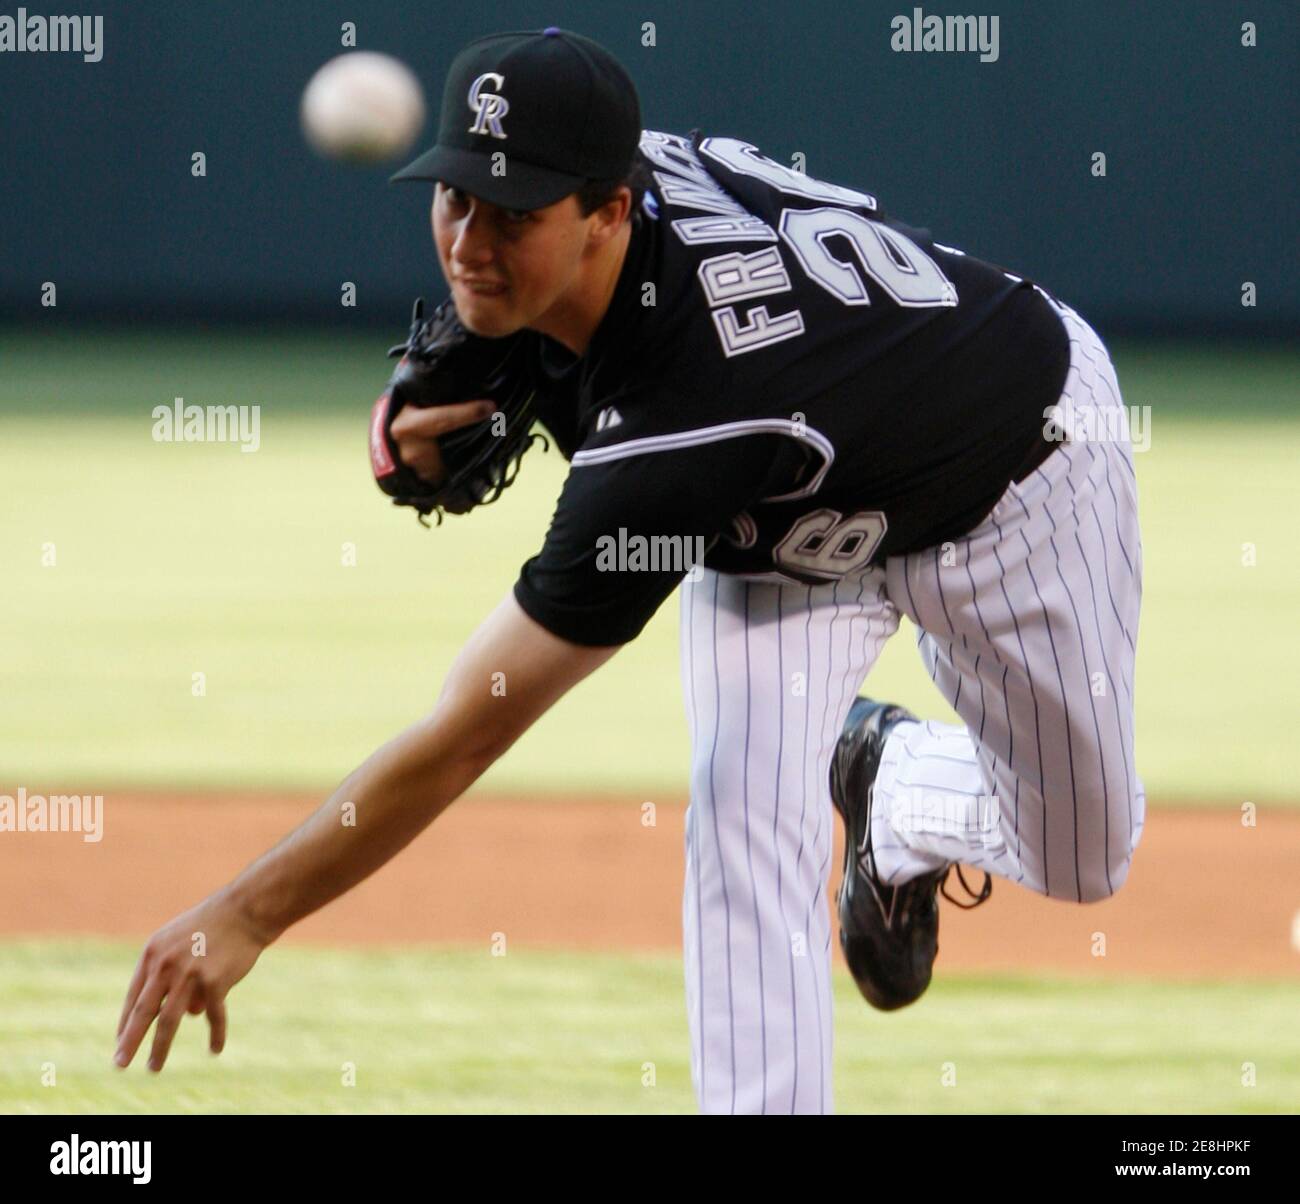 Colorado Rockies pitcher Jeff Francis throws against the New York Yankees in the top of the first inning during their MLB interleague baseball game in Denver, Colorado June 20, 2007. REUTERS/Rick Wilking (UNITED STATES) Stock Photo